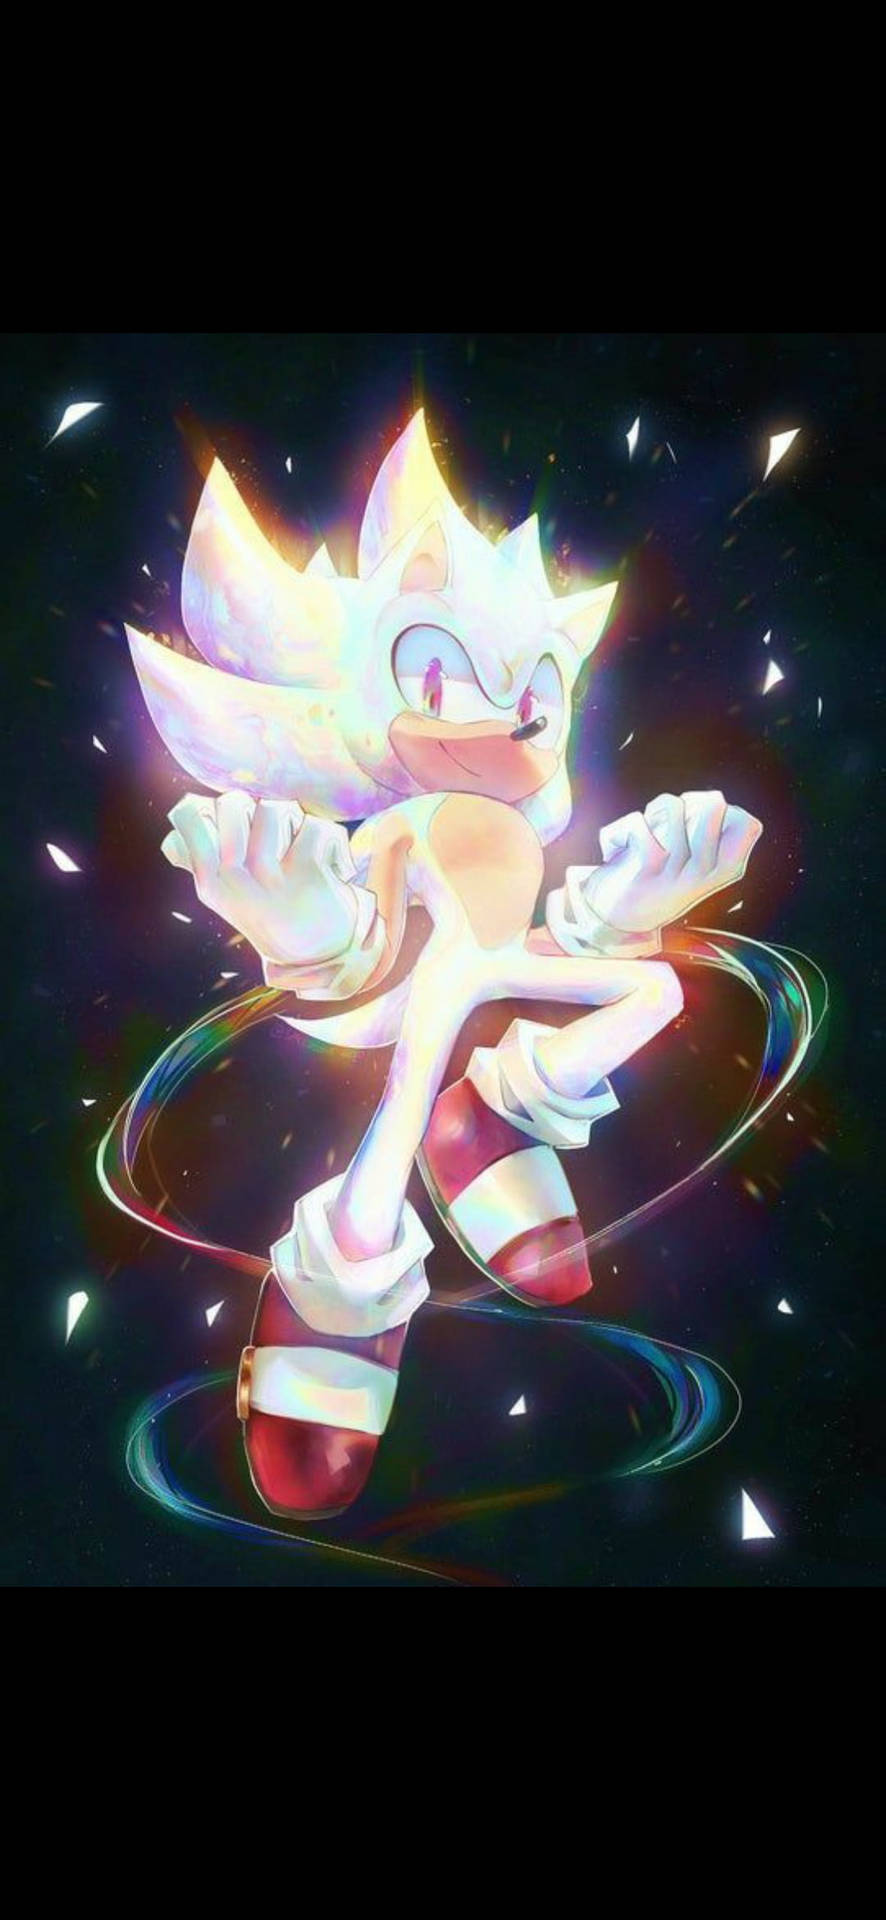 Glowing White Sonic The Hedgehog Wallpaper